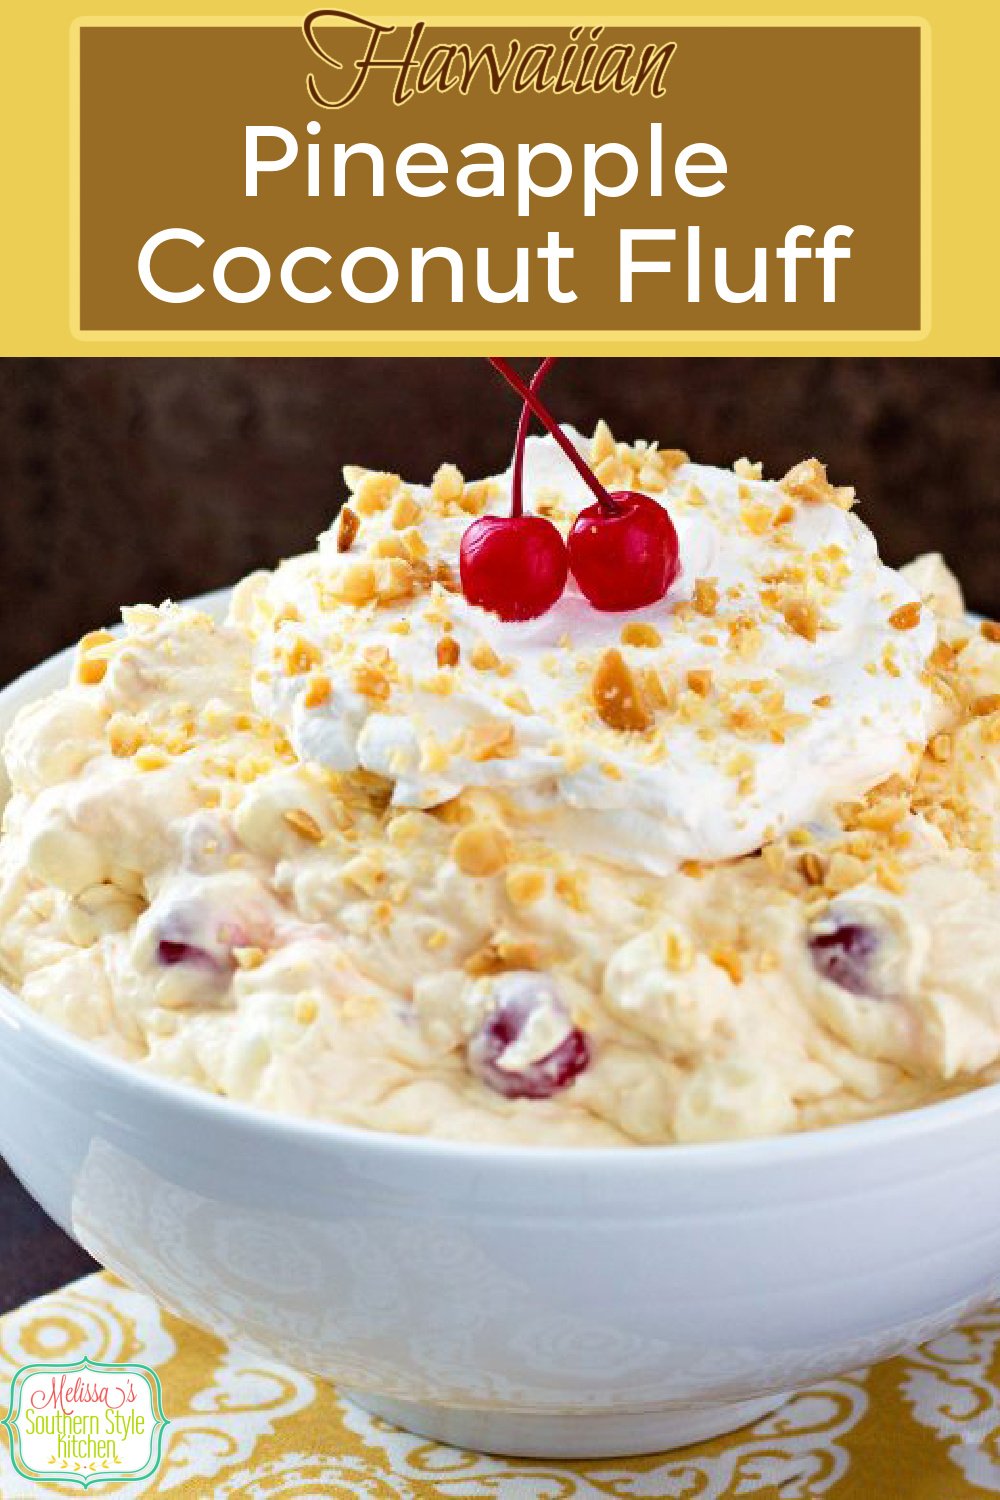 You can whip-up a batch of the island inspired fluff for dessert in a snap! #pineapplefluff #hawaiianfluff #pineapplecoconutfluff #easyrecipes #nobakedesserts #desserts #dessertfoodrecipes #coconut #holidayrecipes #sweets #southernfood #southernrecipes